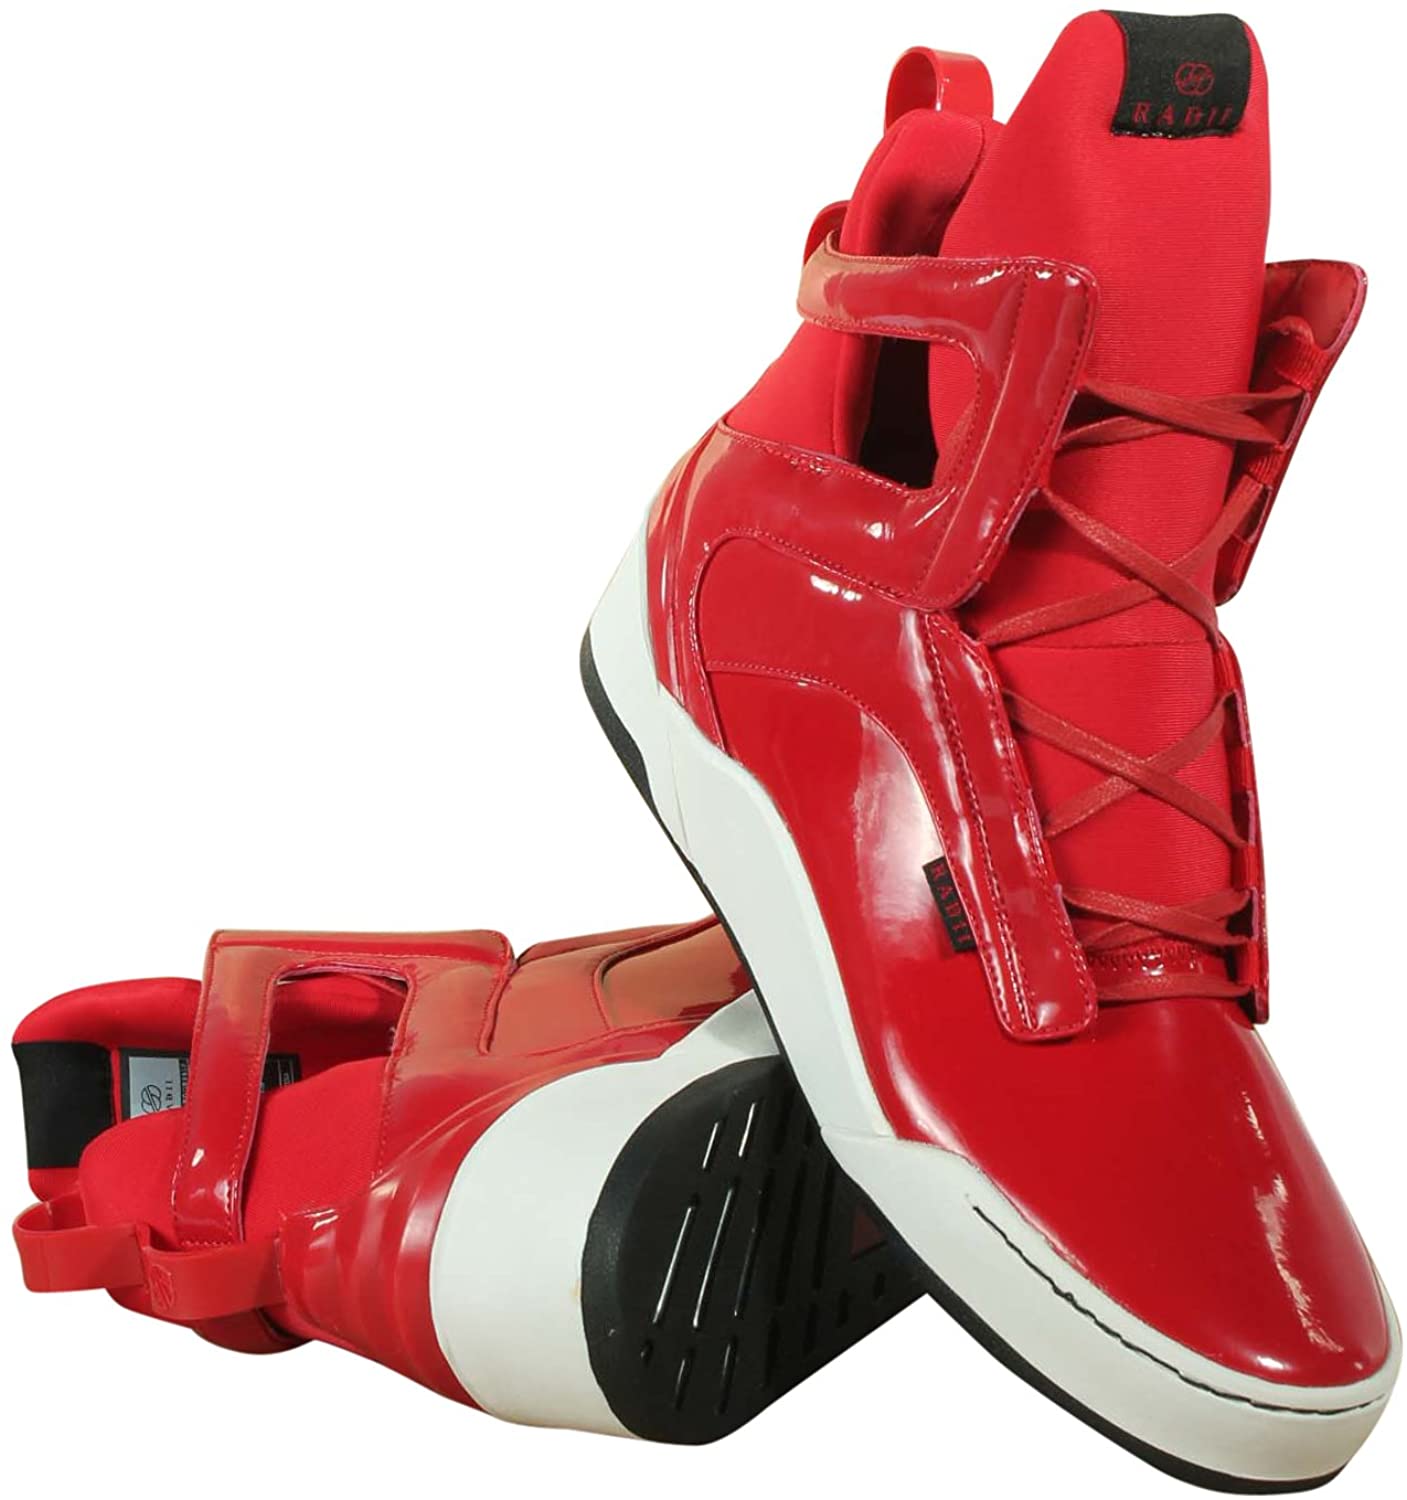 Radii Prism Mens Red Leather High Top Lace Up Sneakers Shoes